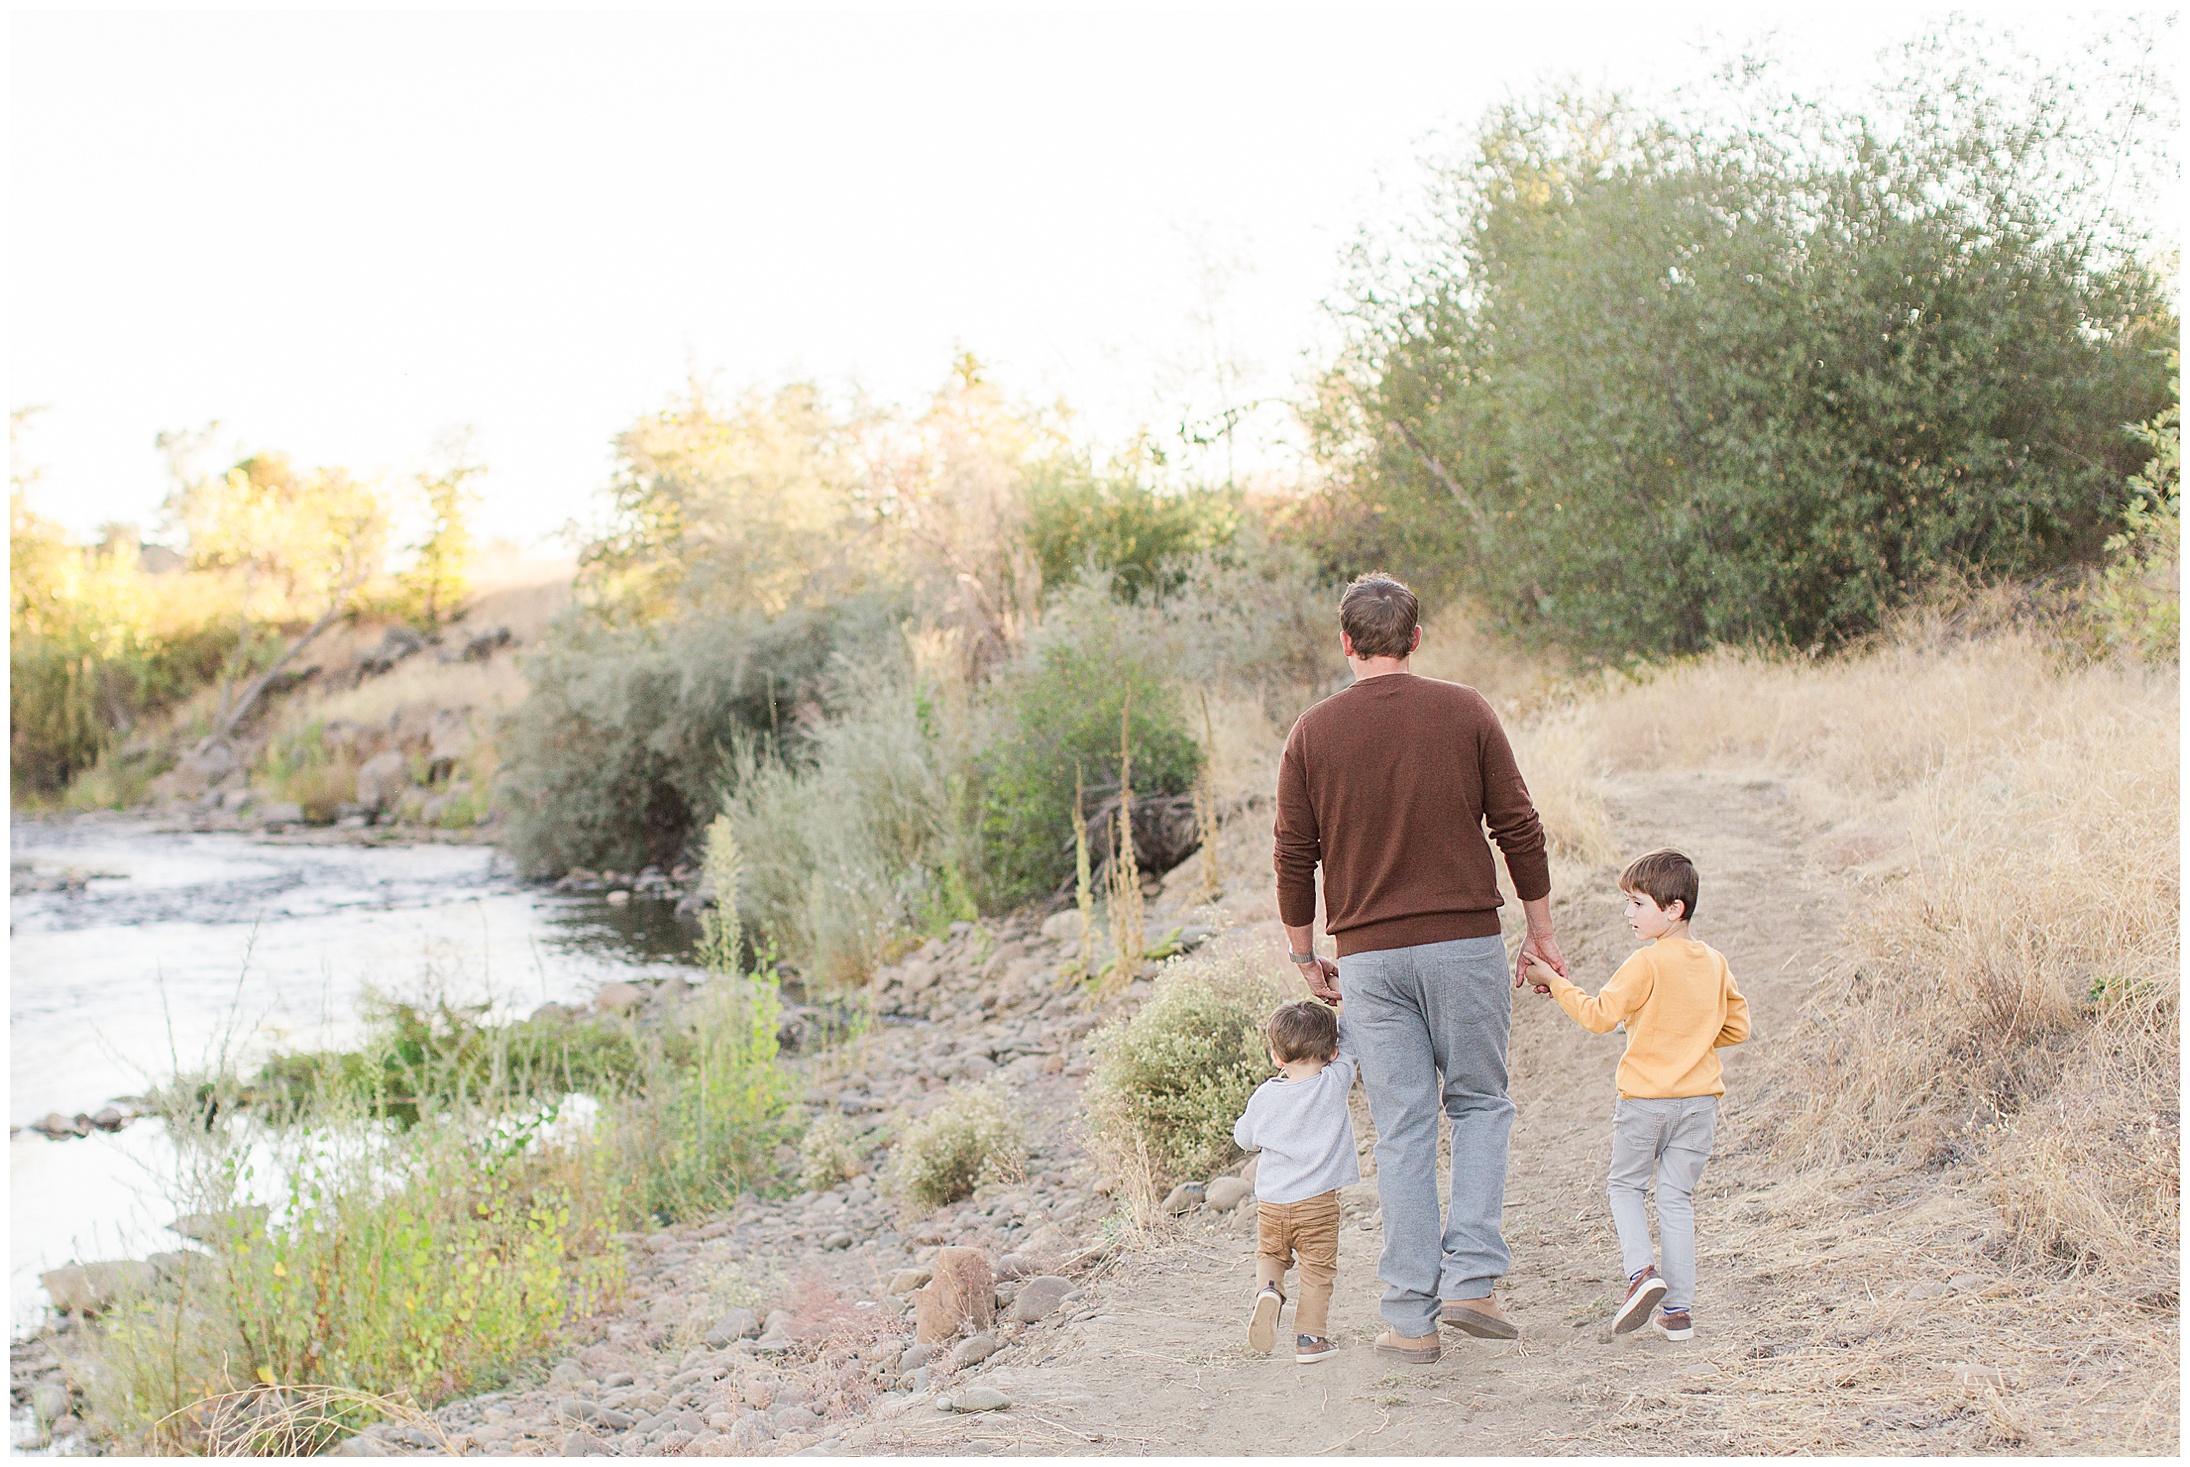 Creekside Fall Family Portraits Chico CA Sequin Dress,